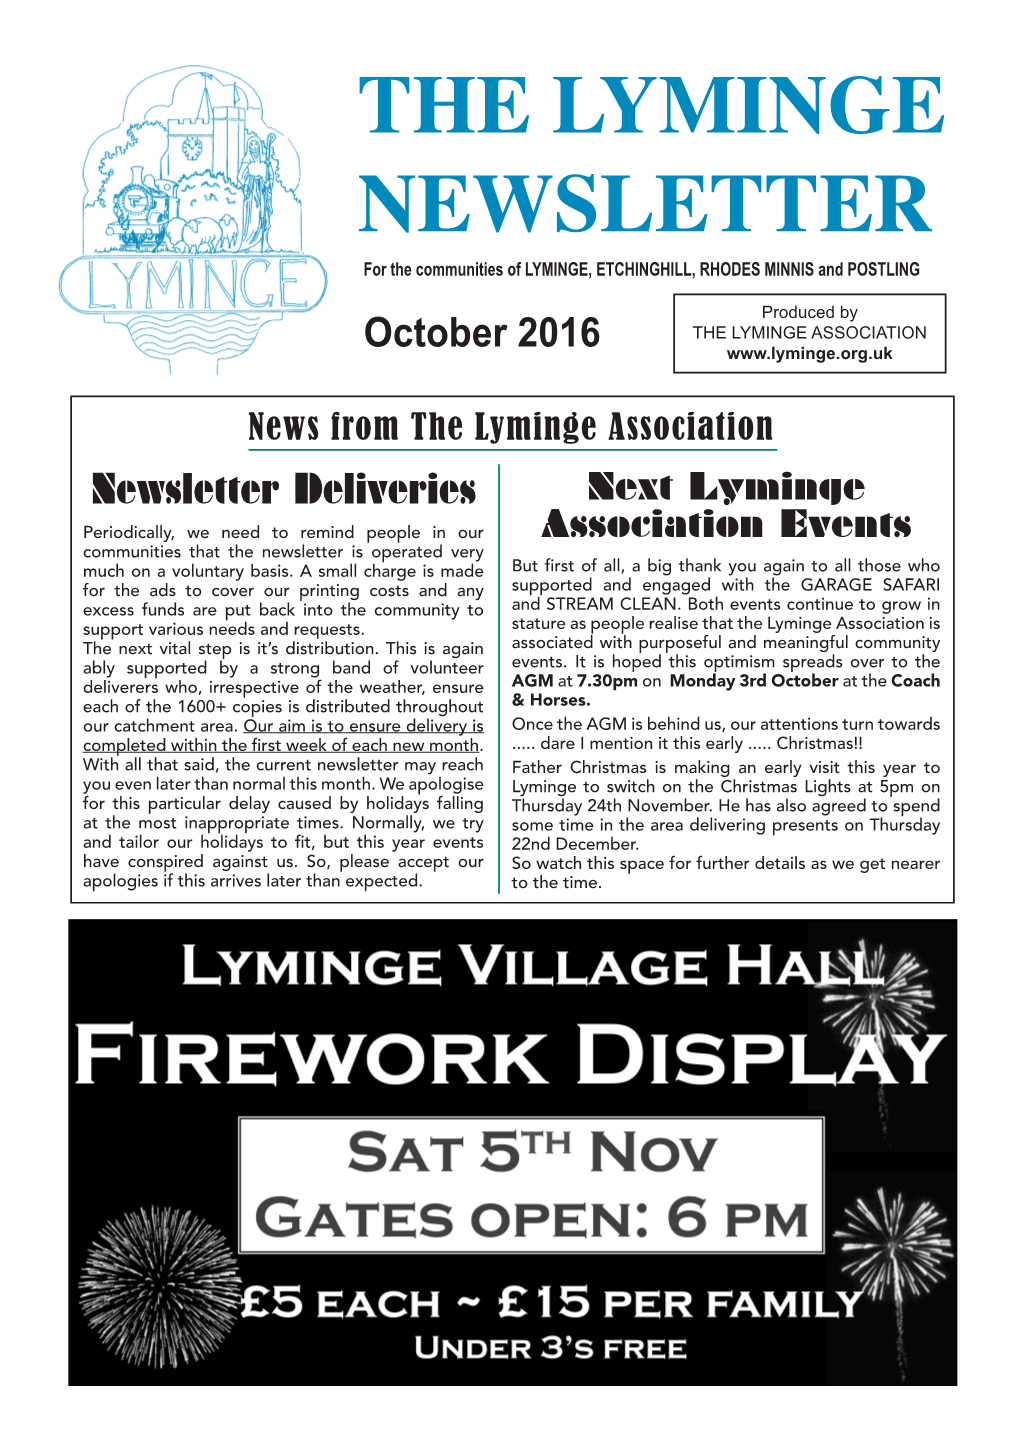 THE LYMINGE NEWSLETTER for the Communities of LYMINGE, ETCHINGHILL, RHODES MINNIS and POSTLING